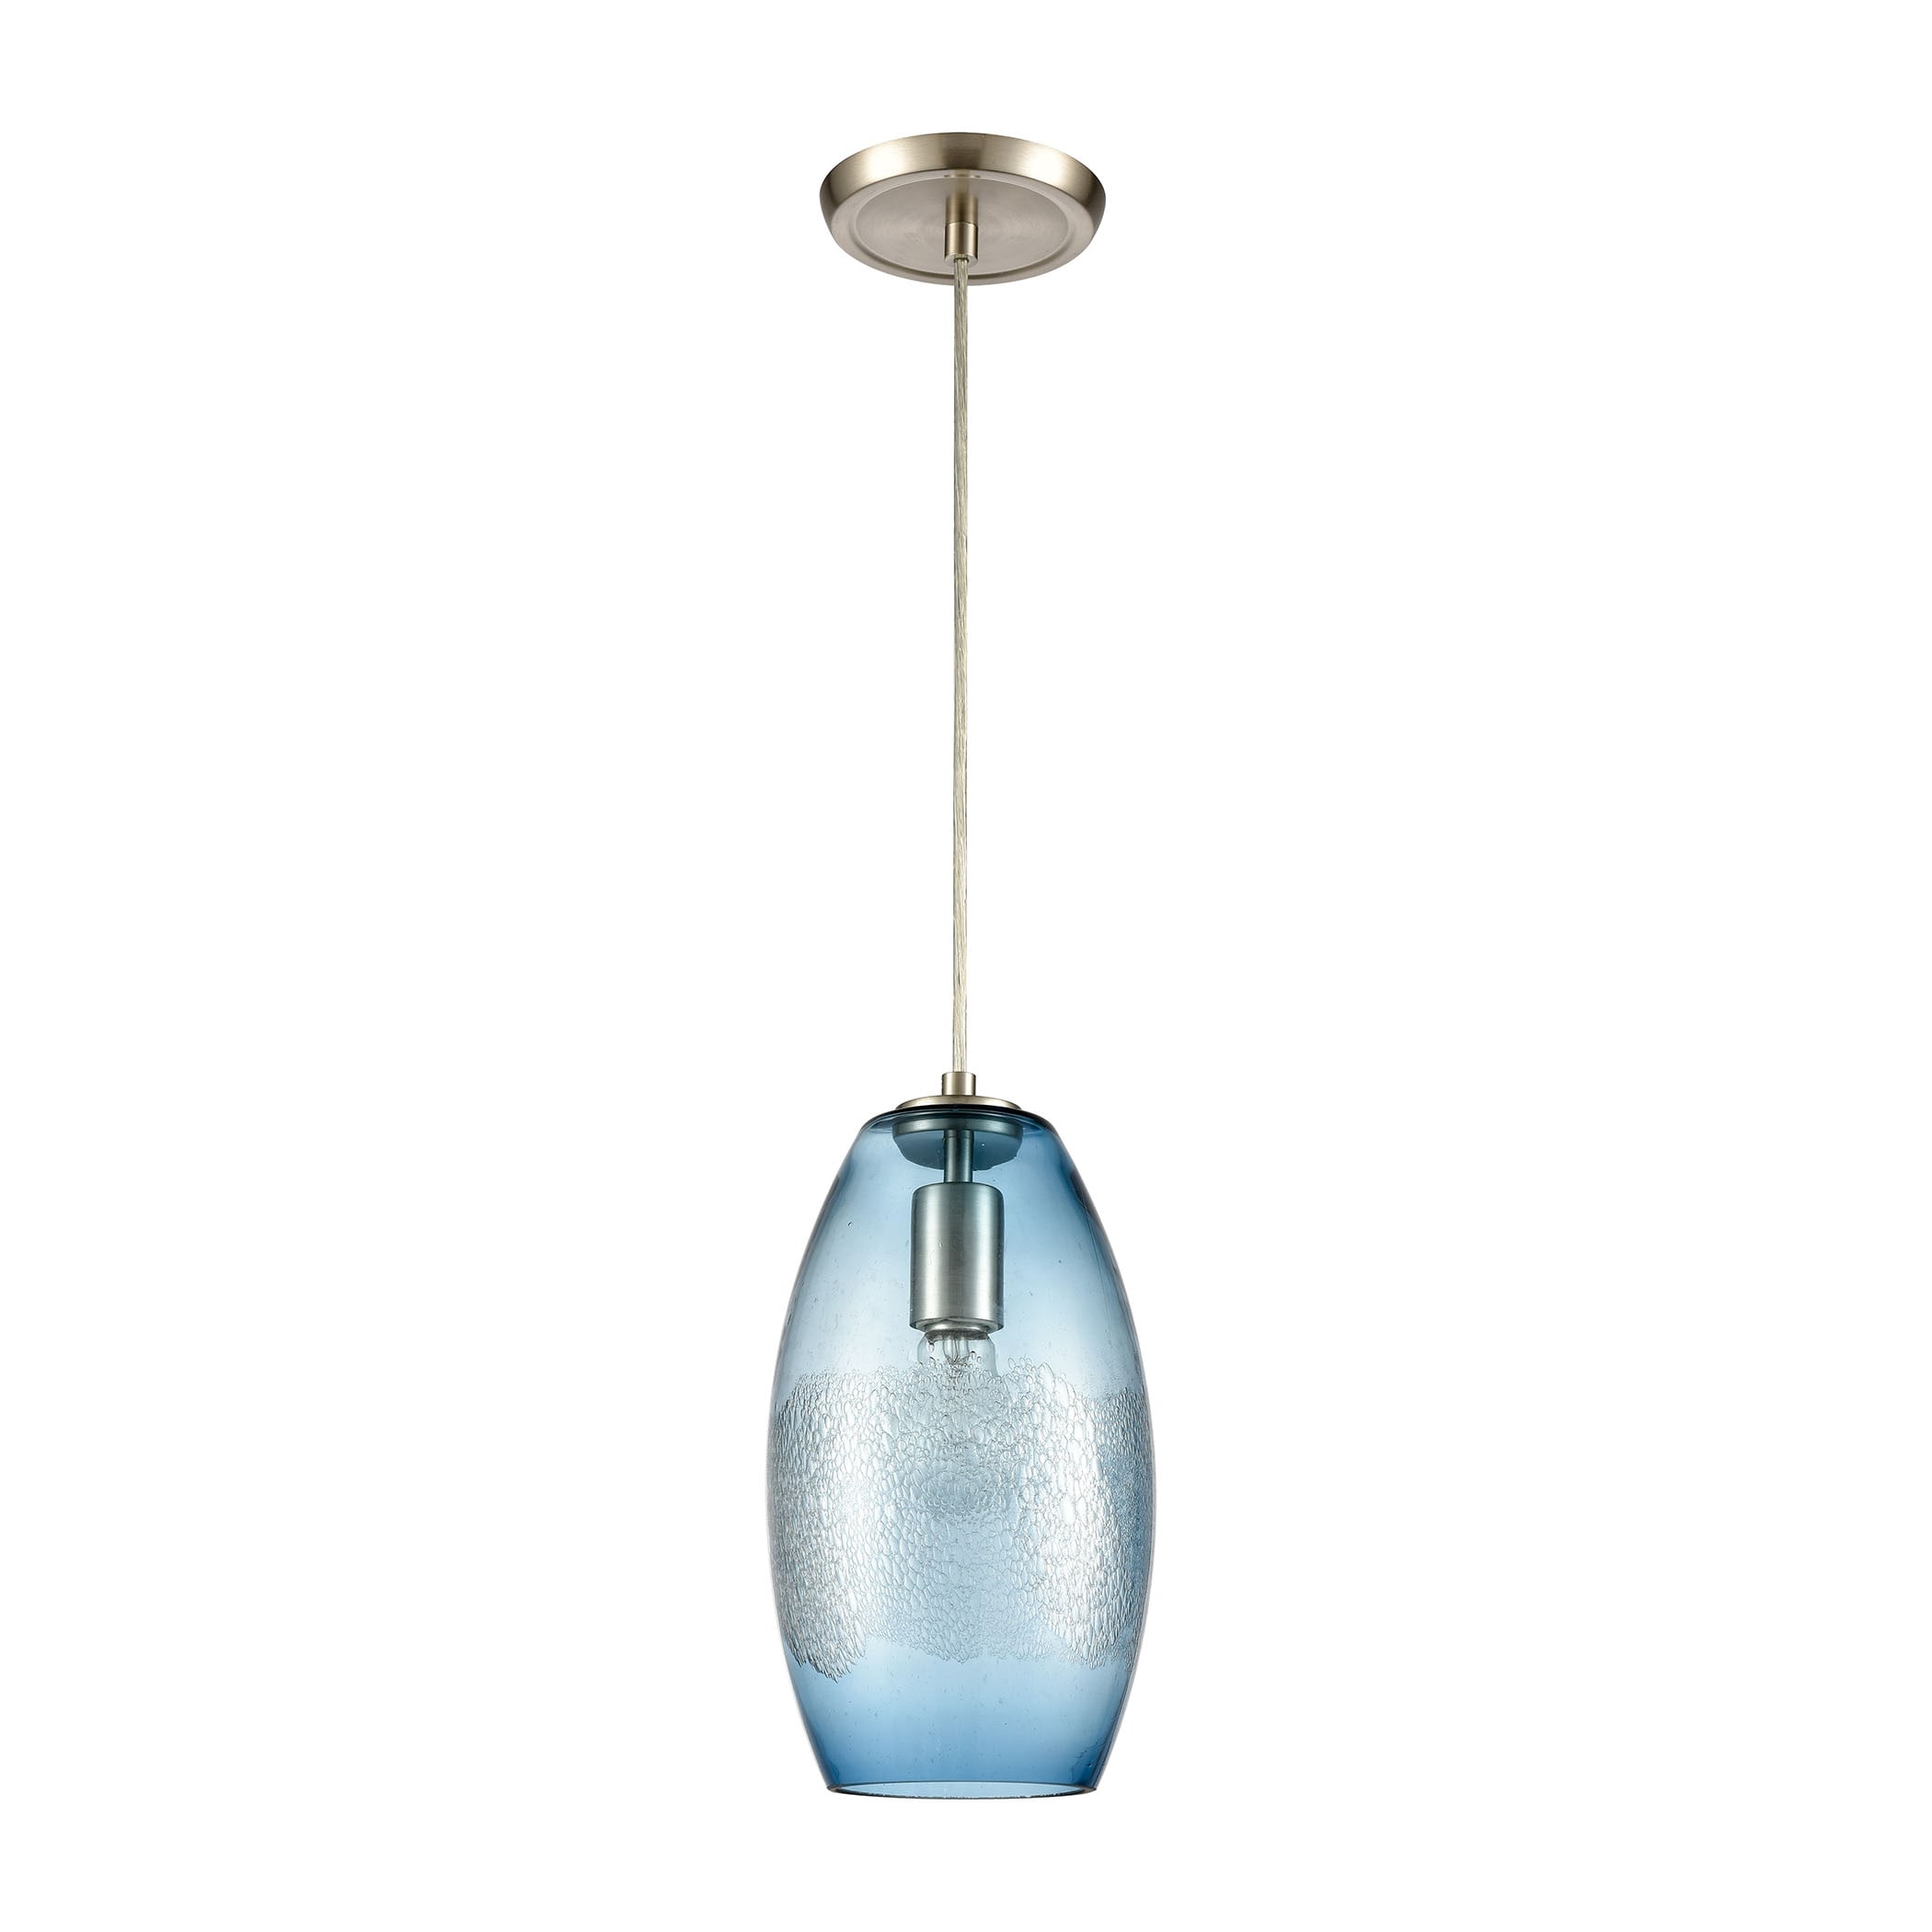 Westmore by ELK Lighting Knightdale Satin Nickel Modern/Contemporary Bell LED Mini Hanging Light in the Lighting department Lowes.com